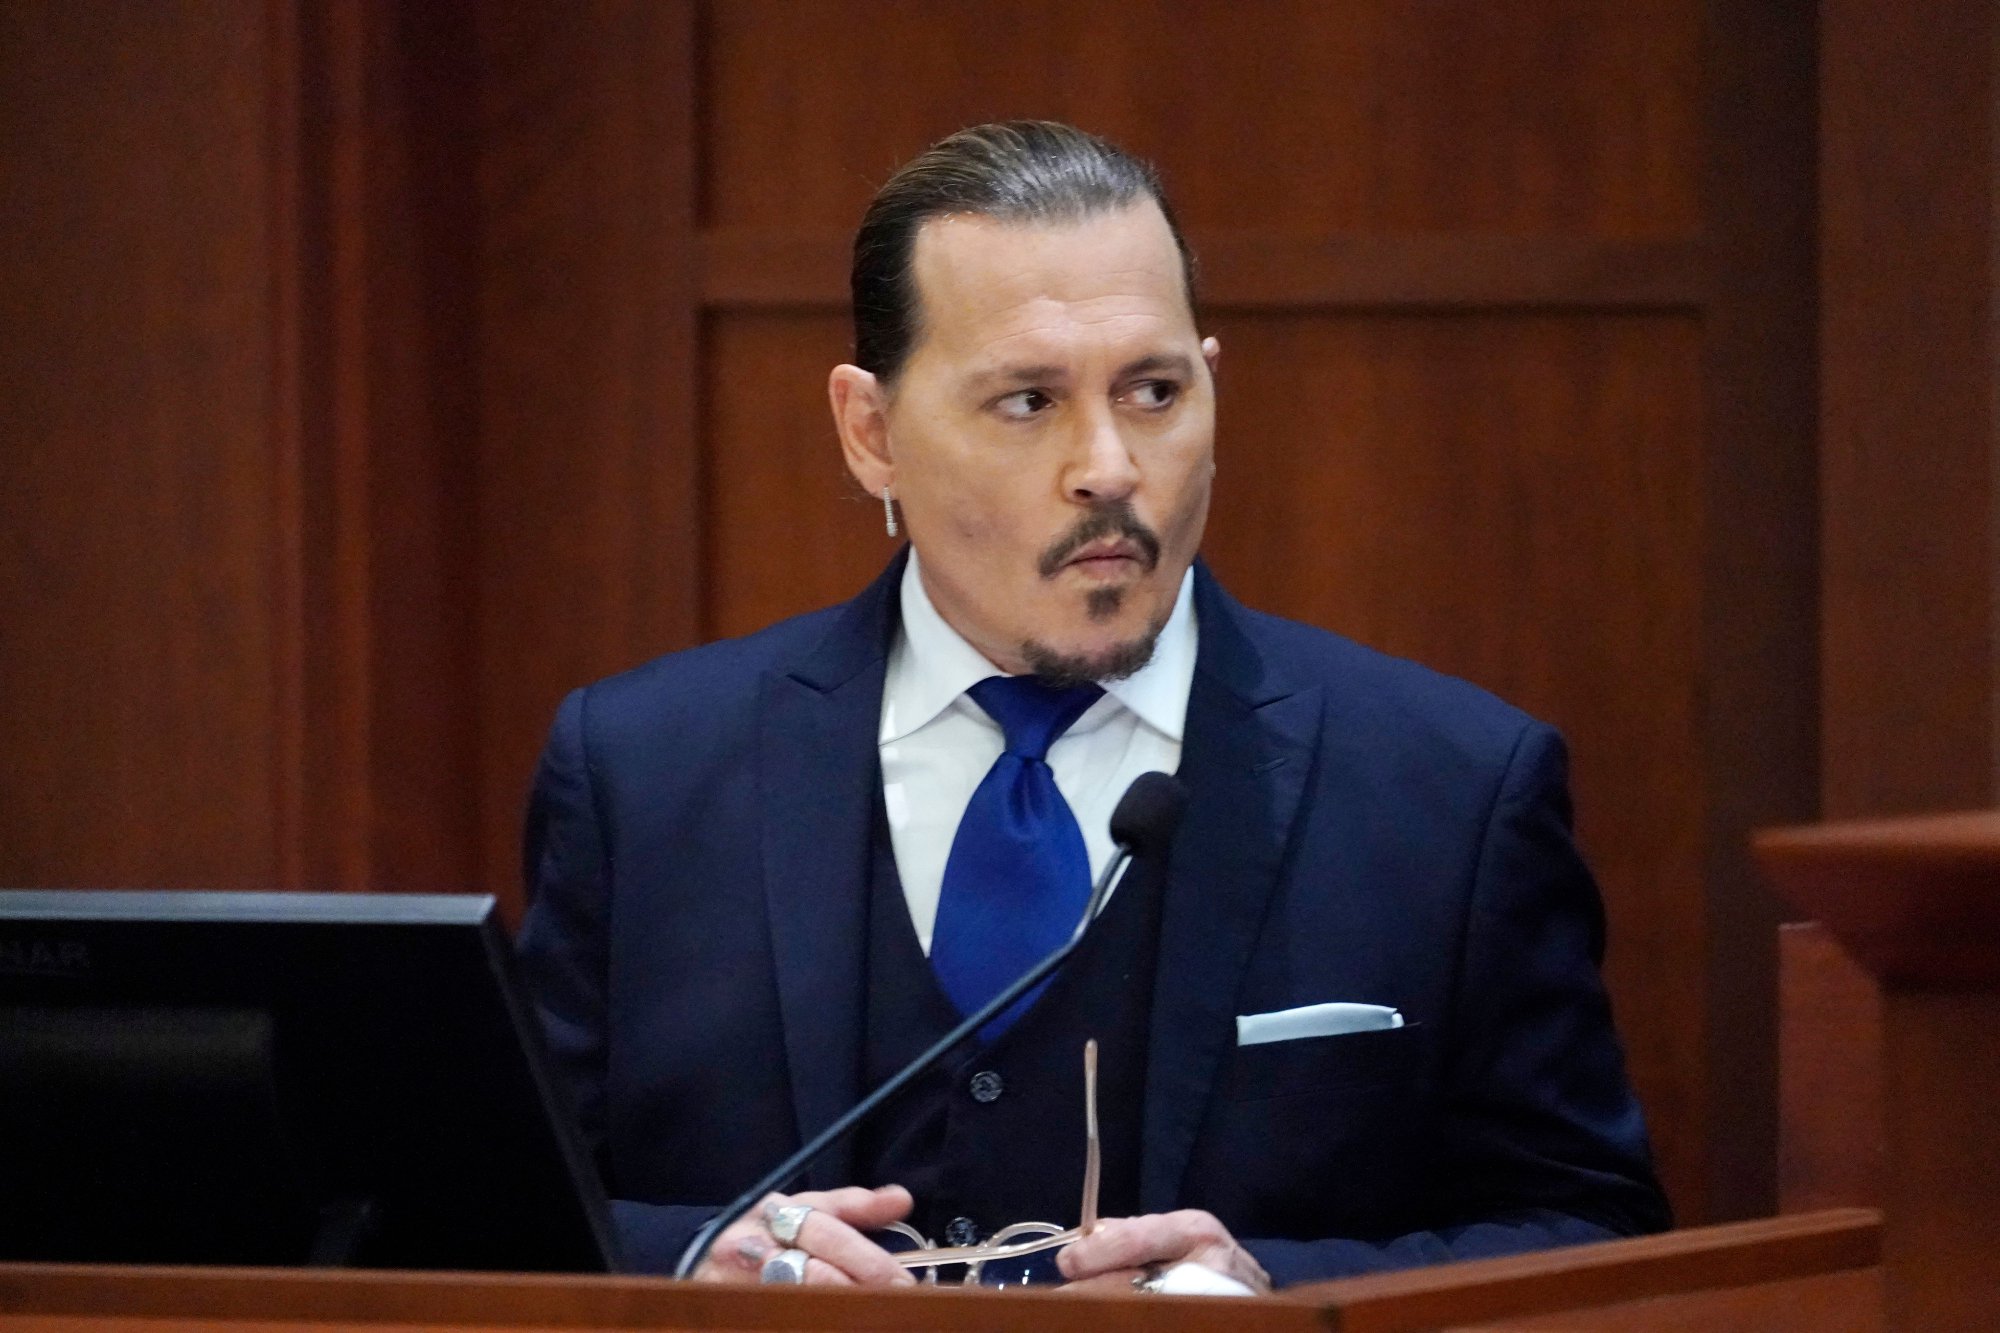 Johnny Depp testifies, wearing a blue suit and holding his sunglasses, at his trial versus Amber Heard. Depp joked about hearsay while on the stand.